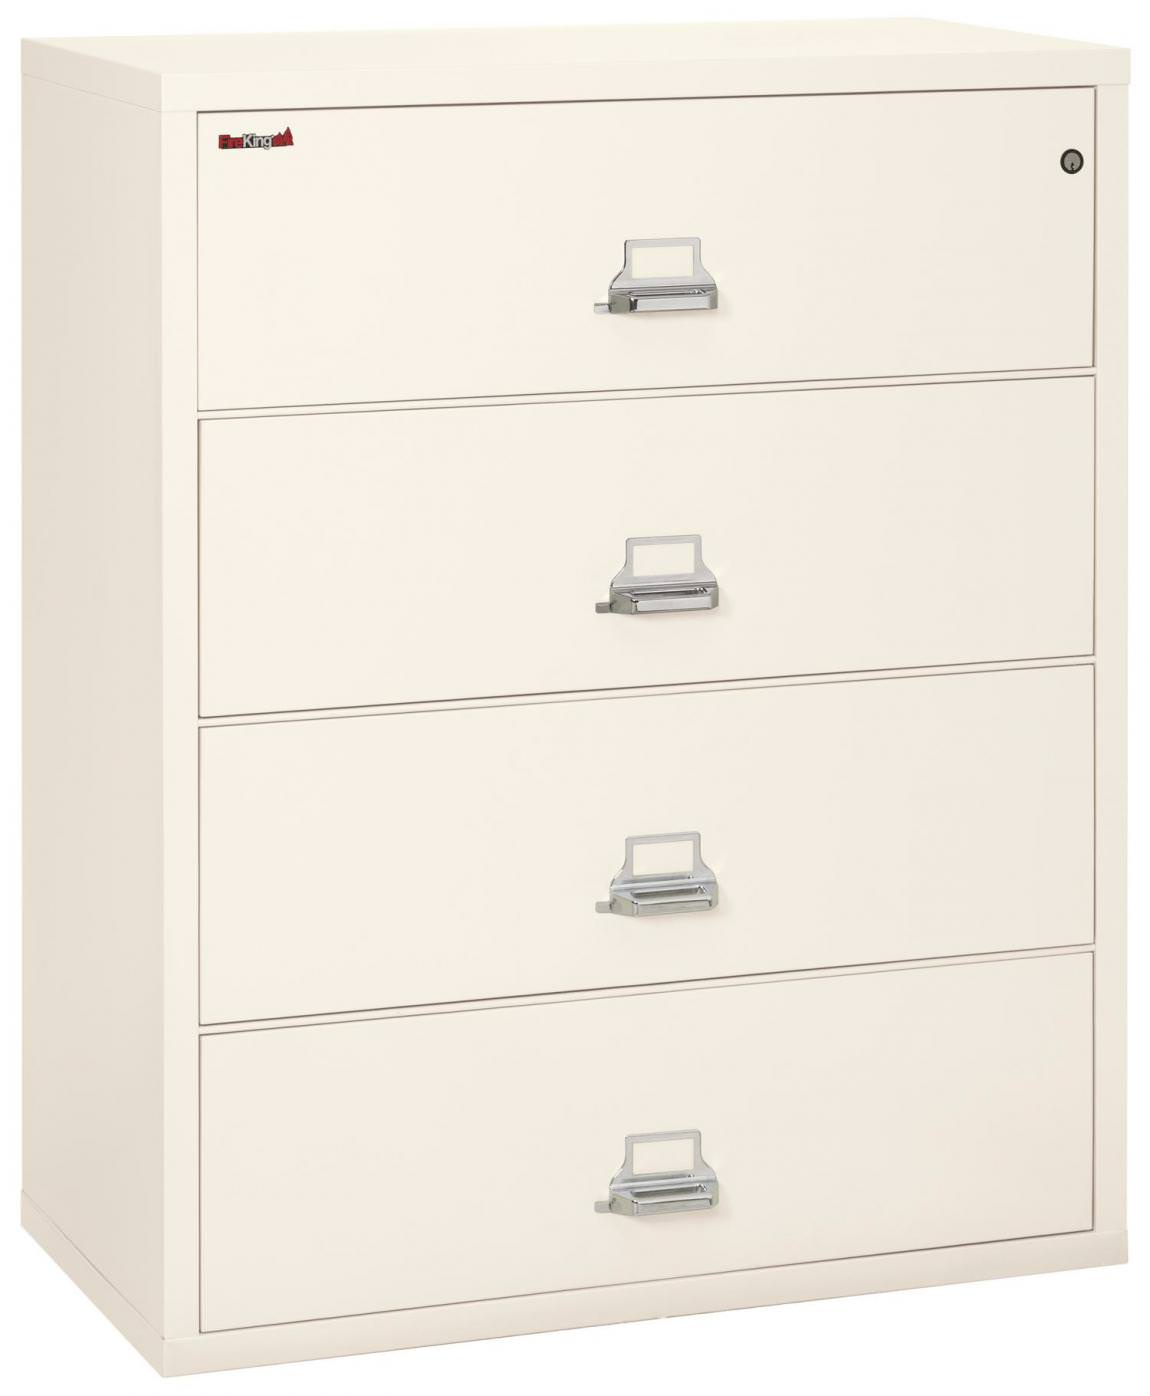 4 Drawer Fireproof Lateral File Cabinet - 44 Inch